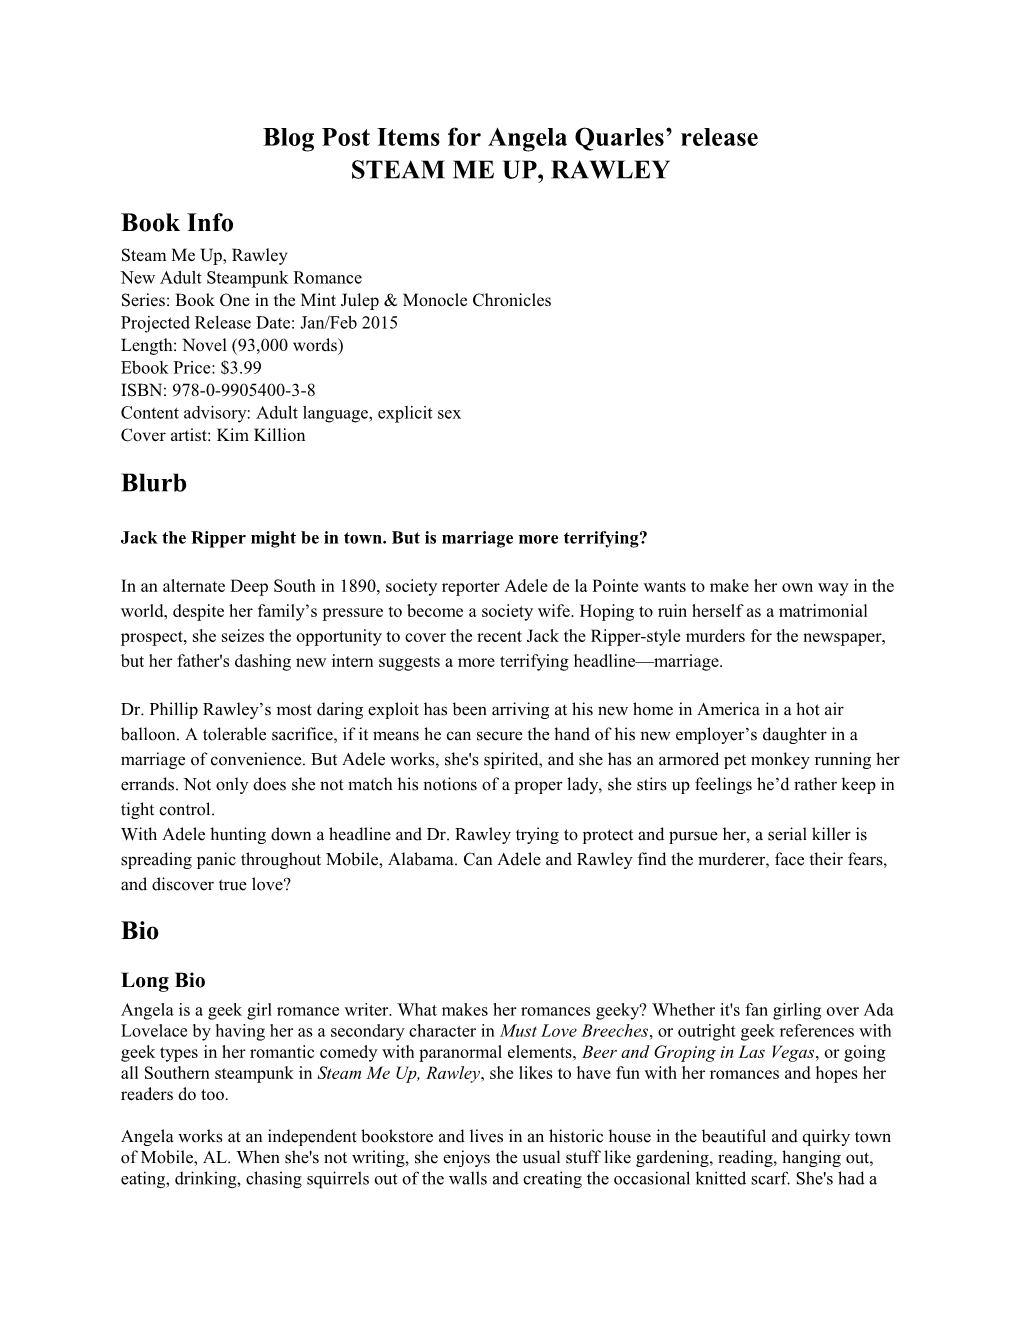 Blog Post Items for Angela Quarles Release STEAM ME UP, RAWLEY